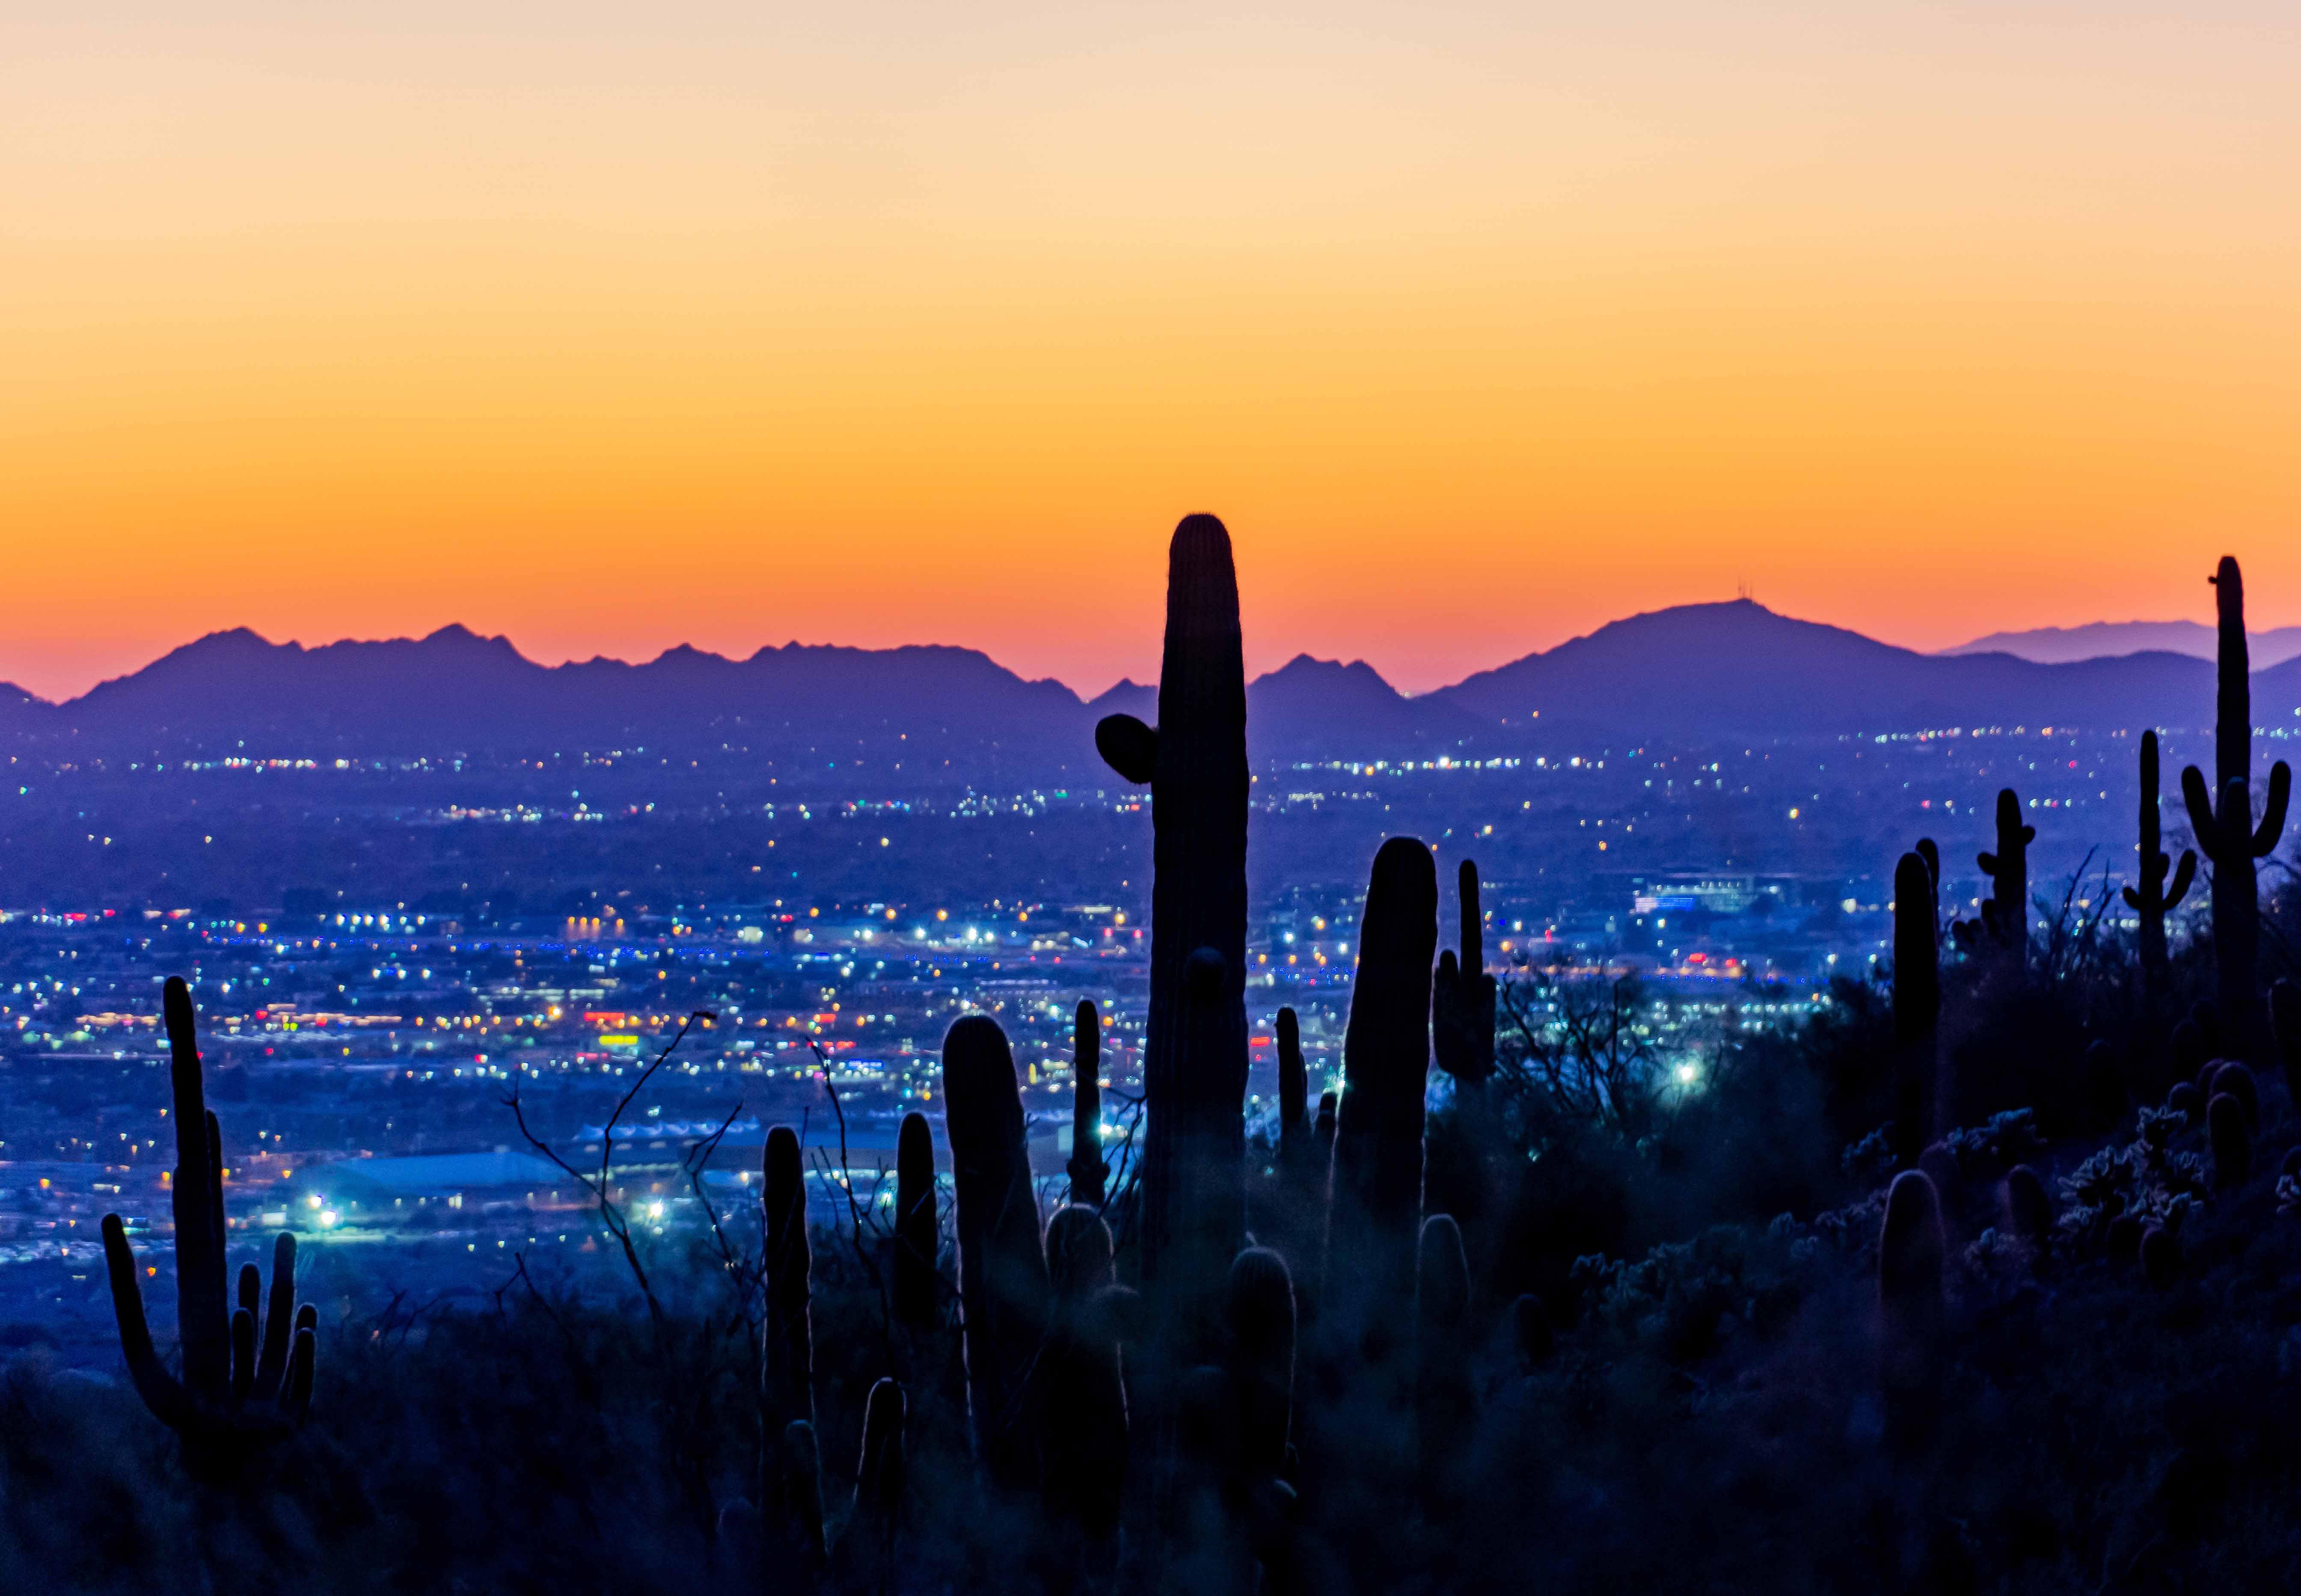 night time for of Scottsdale with cactus and sunset